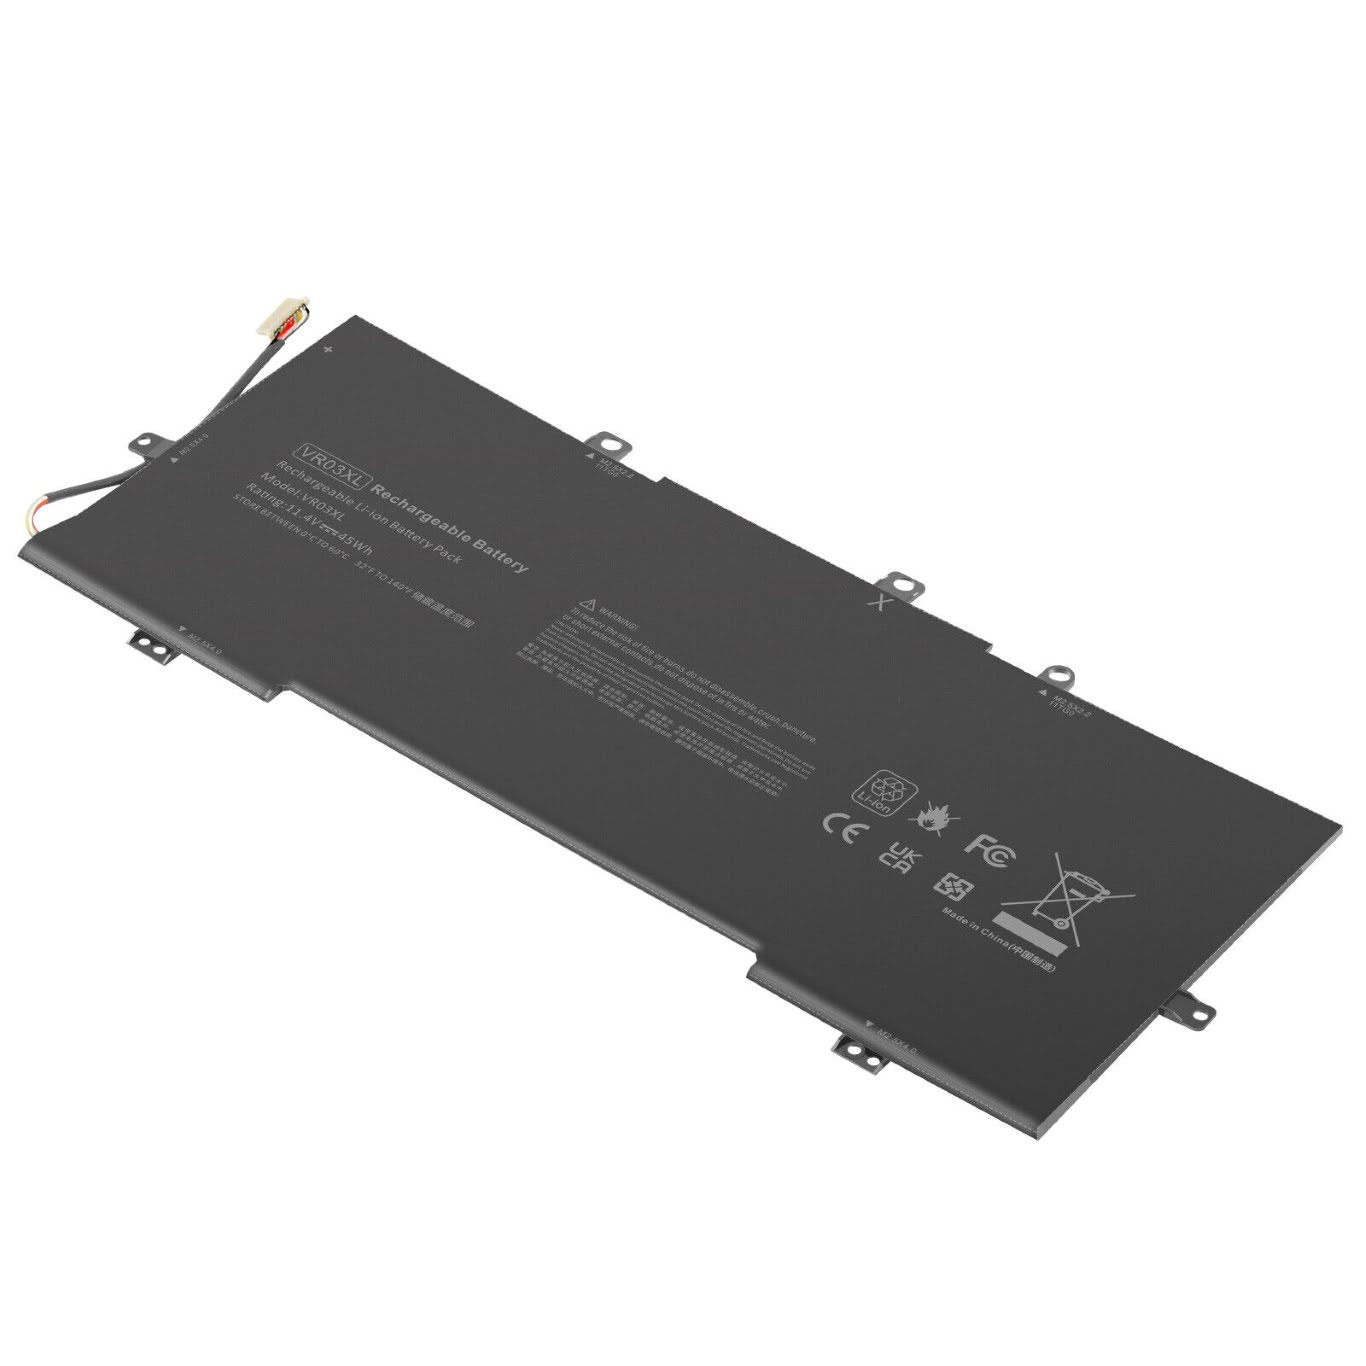 816238-850, 816497-1C1 replacement Laptop Battery for HP Envy 13-d000ng, Envy 13-d002ng, 11.4v, 45wh, 6 cells